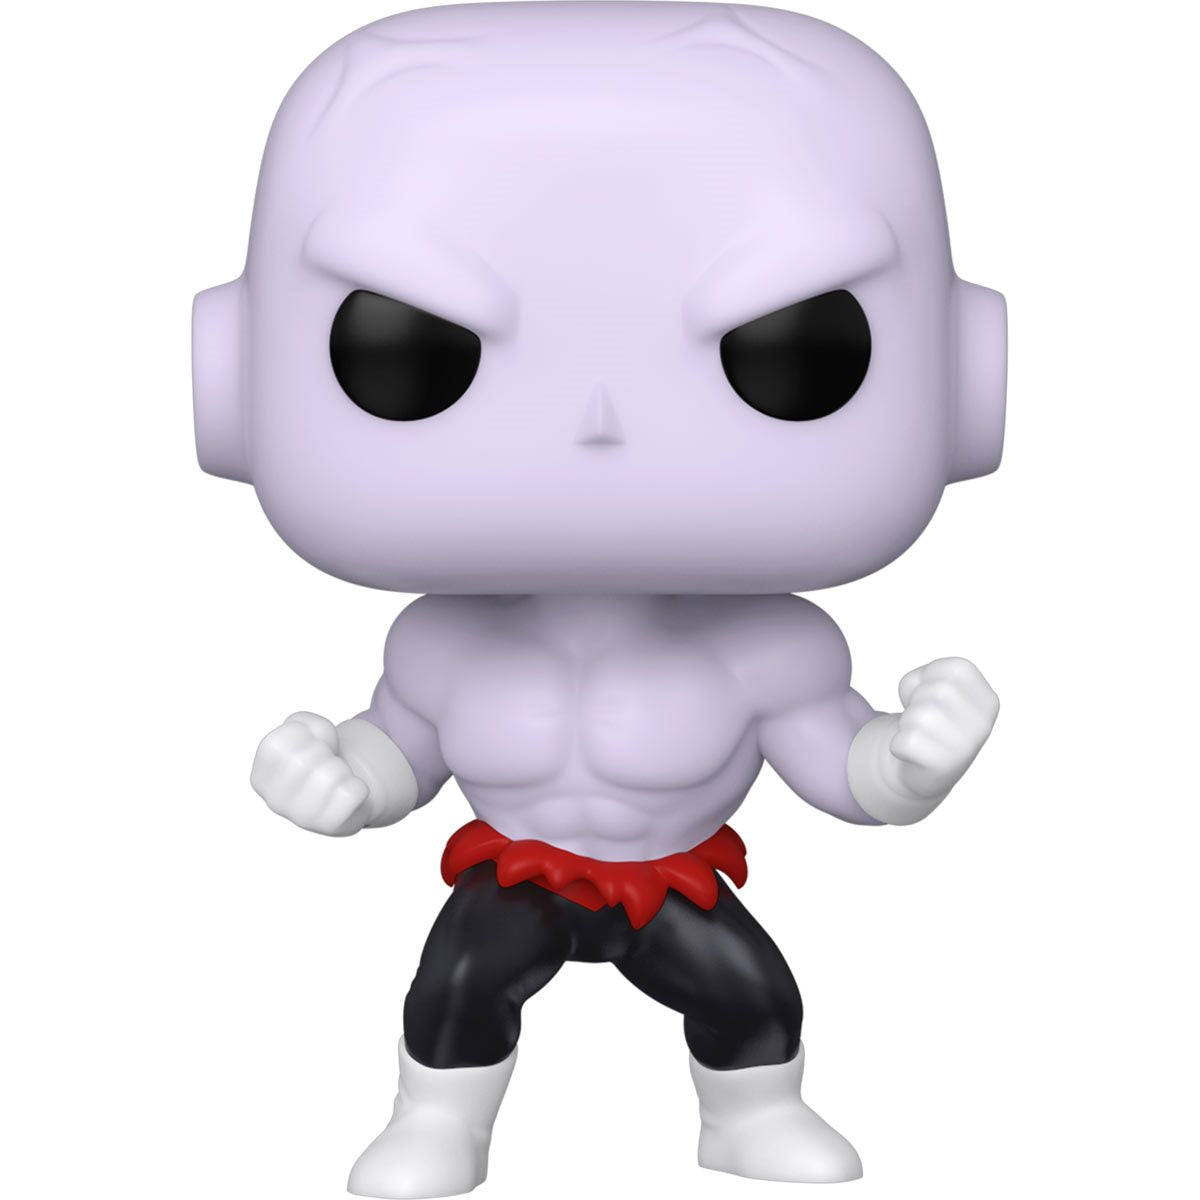 Funko - We're giving away a Majin Buu Pop! To enter: 1. Like this post! 2.  Comment below with your favorite character from Dragon Ball Z!